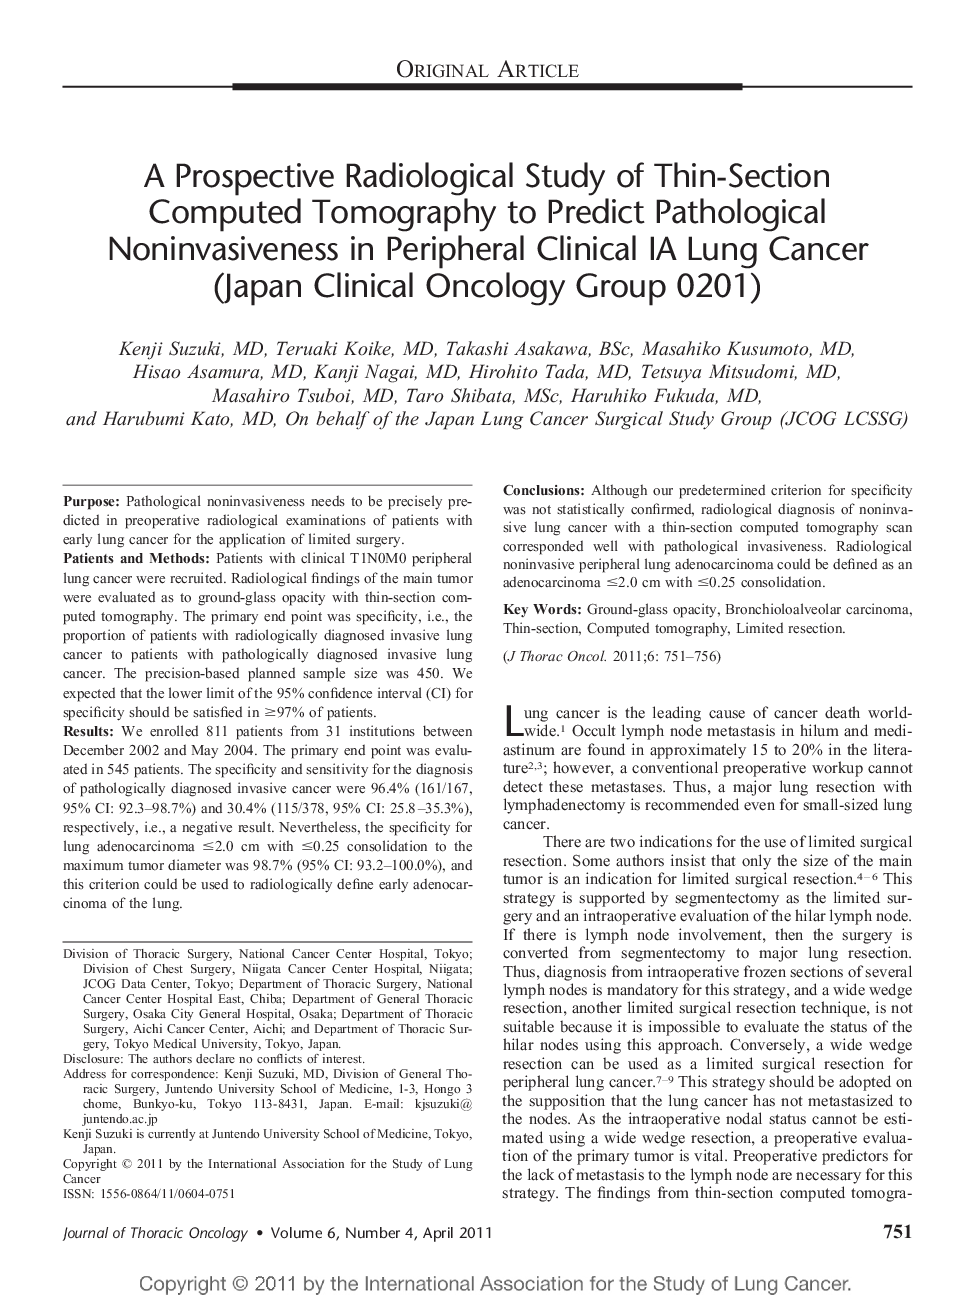 A Prospective Radiological Study of Thin-Section Computed Tomography to Predict Pathological Noninvasiveness in Peripheral Clinical IA Lung Cancer (Japan Clinical Oncology Group 0201) 